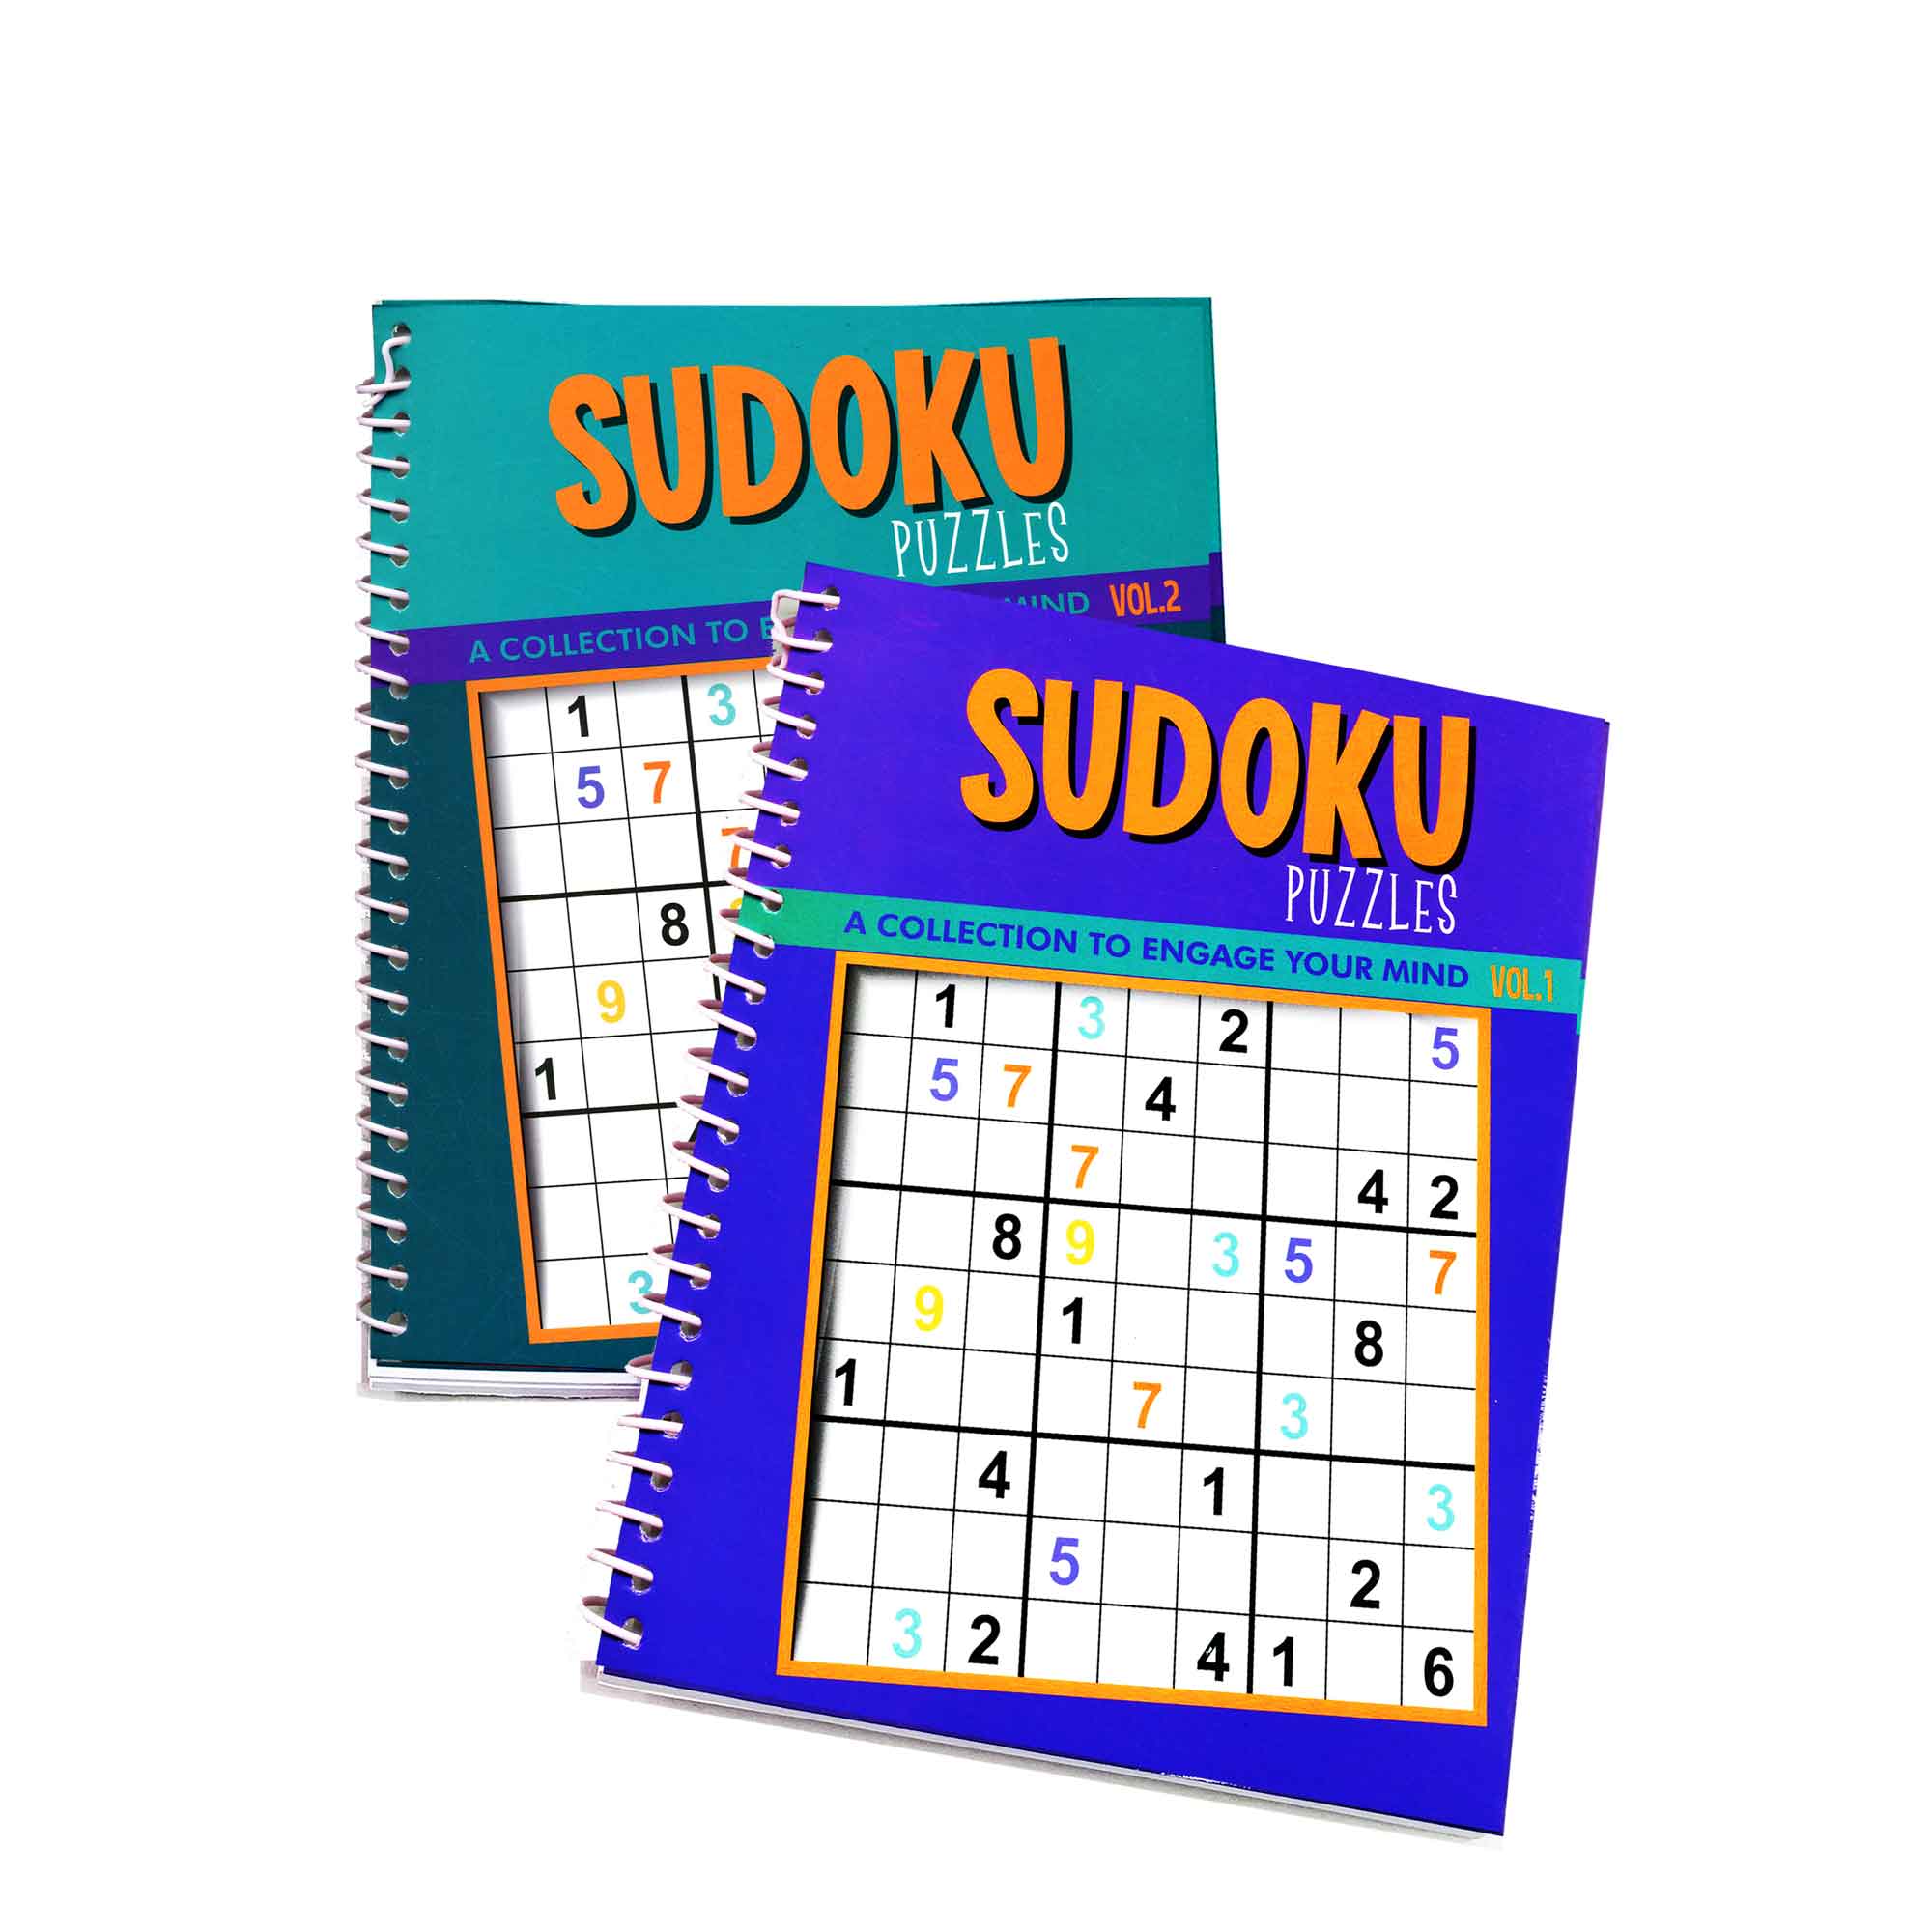 Spiral SUDOKU Puzzles A Collection To Engage Your Mind | DIGEST Size